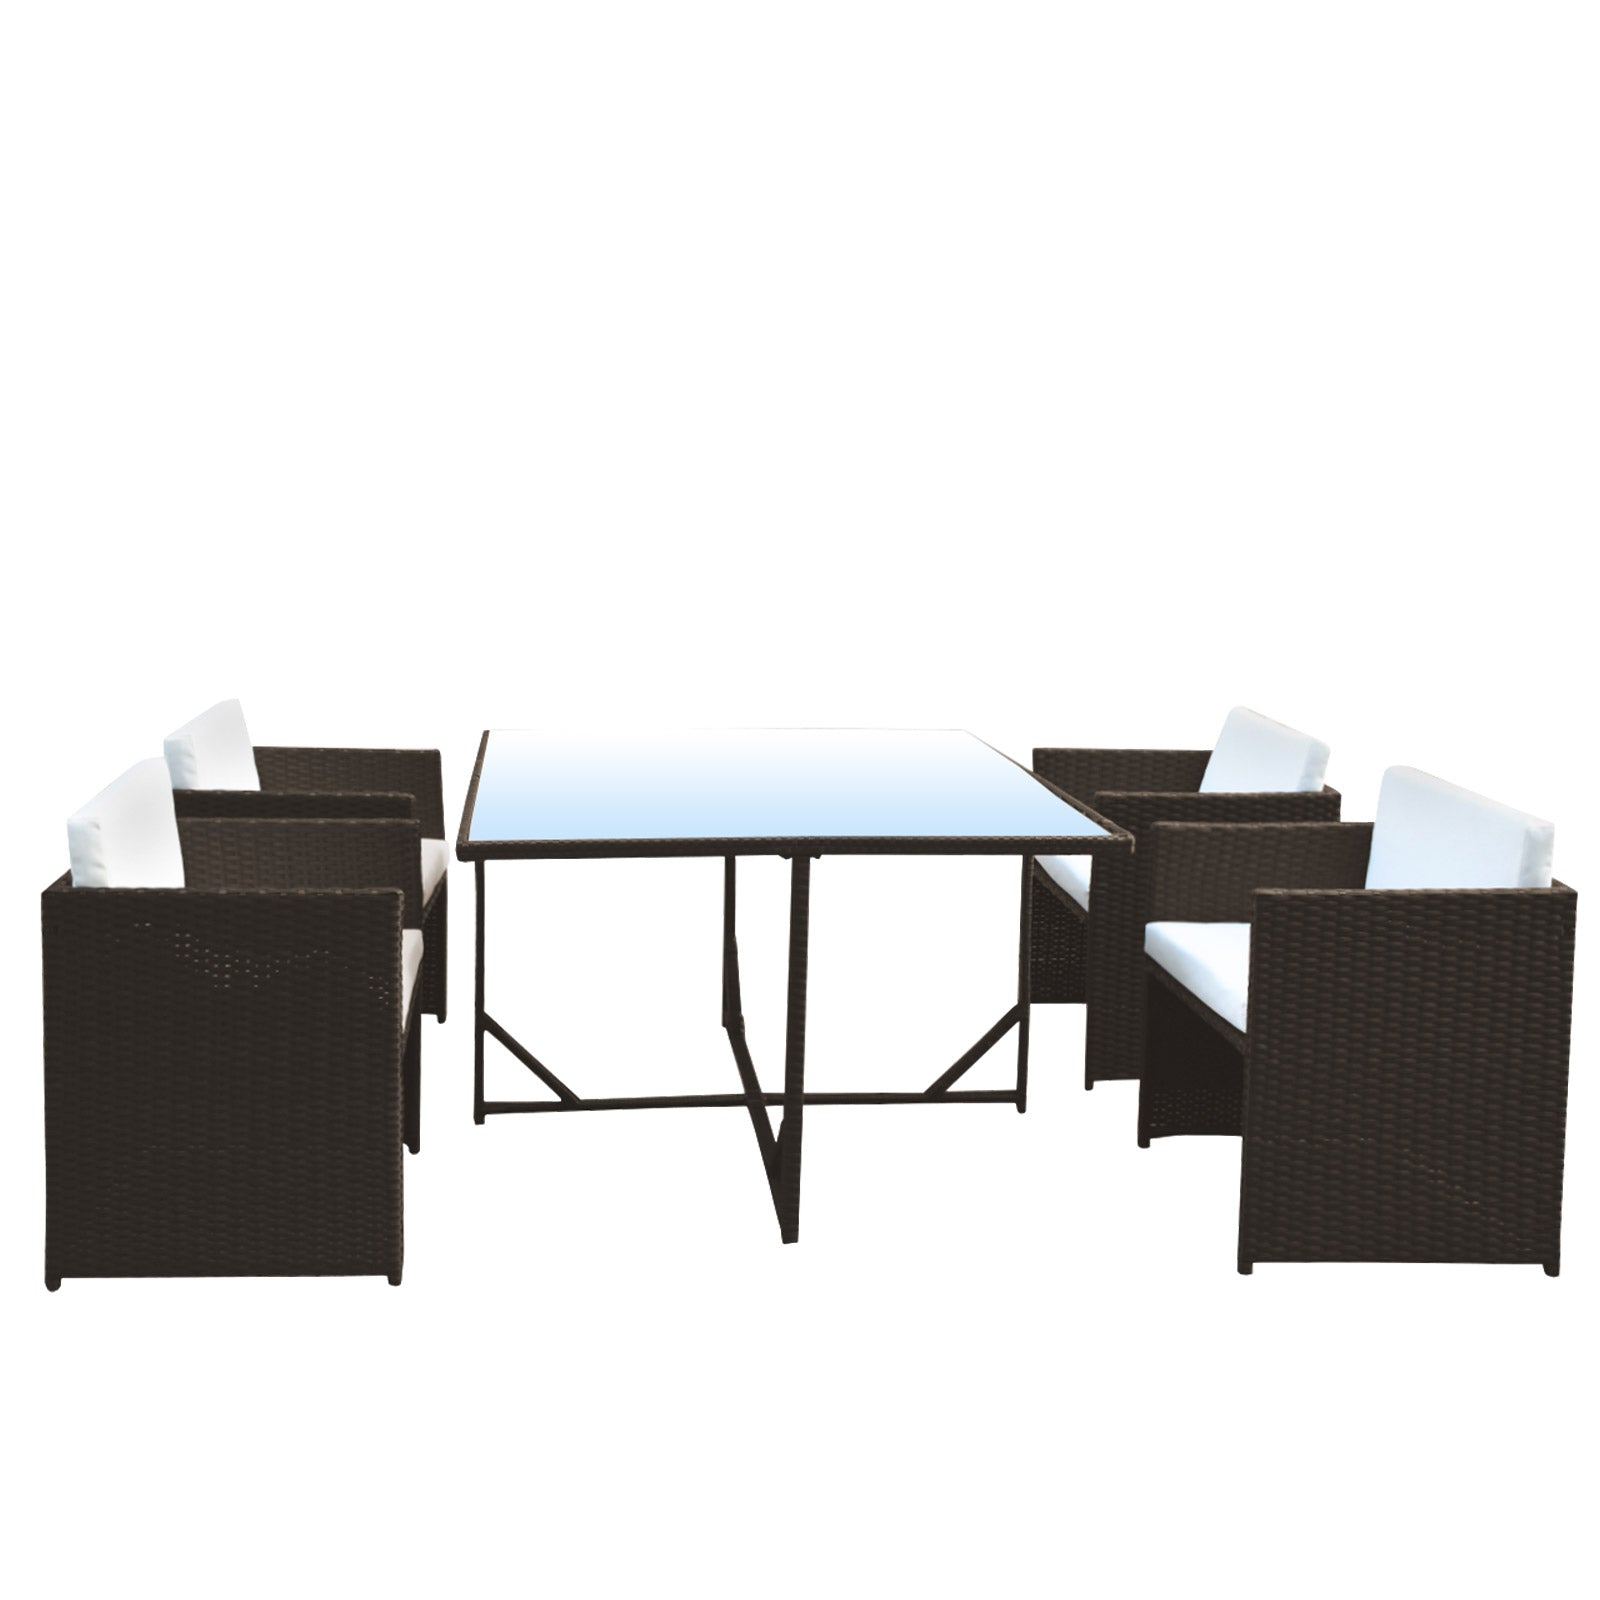 Arcadia Furniture 5 Piece Dining Table Set - Oatmeal and Grey